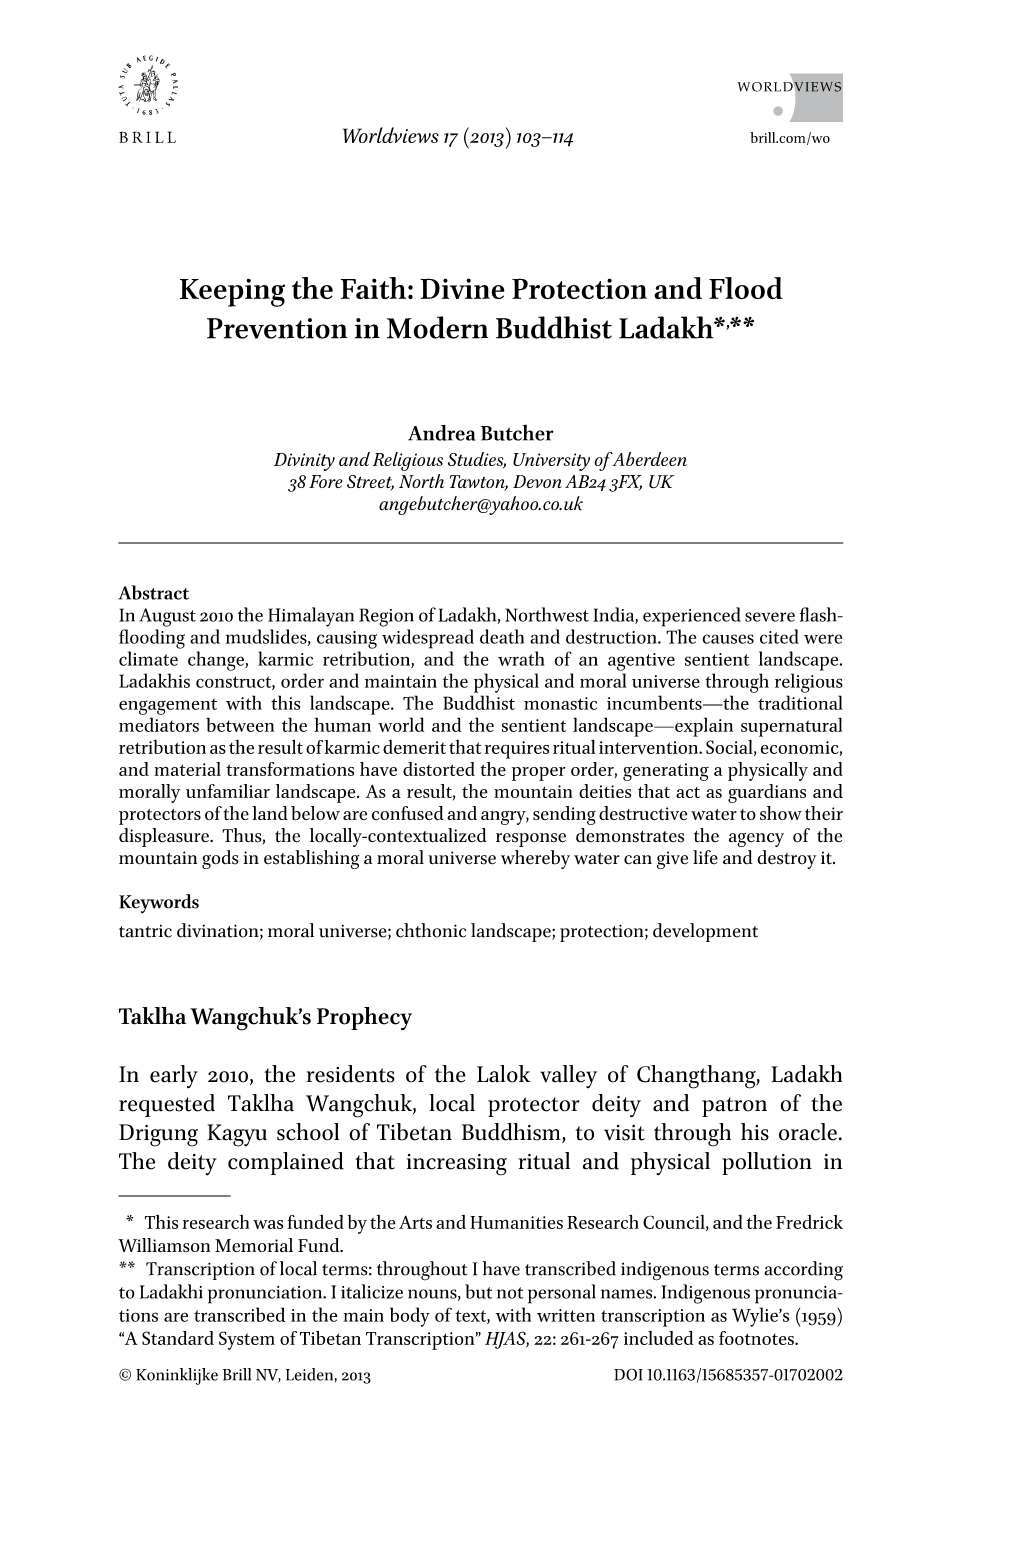 Keeping the Faith: Divine Protection and Flood Prevention in Modern Buddhist Ladakh*,**